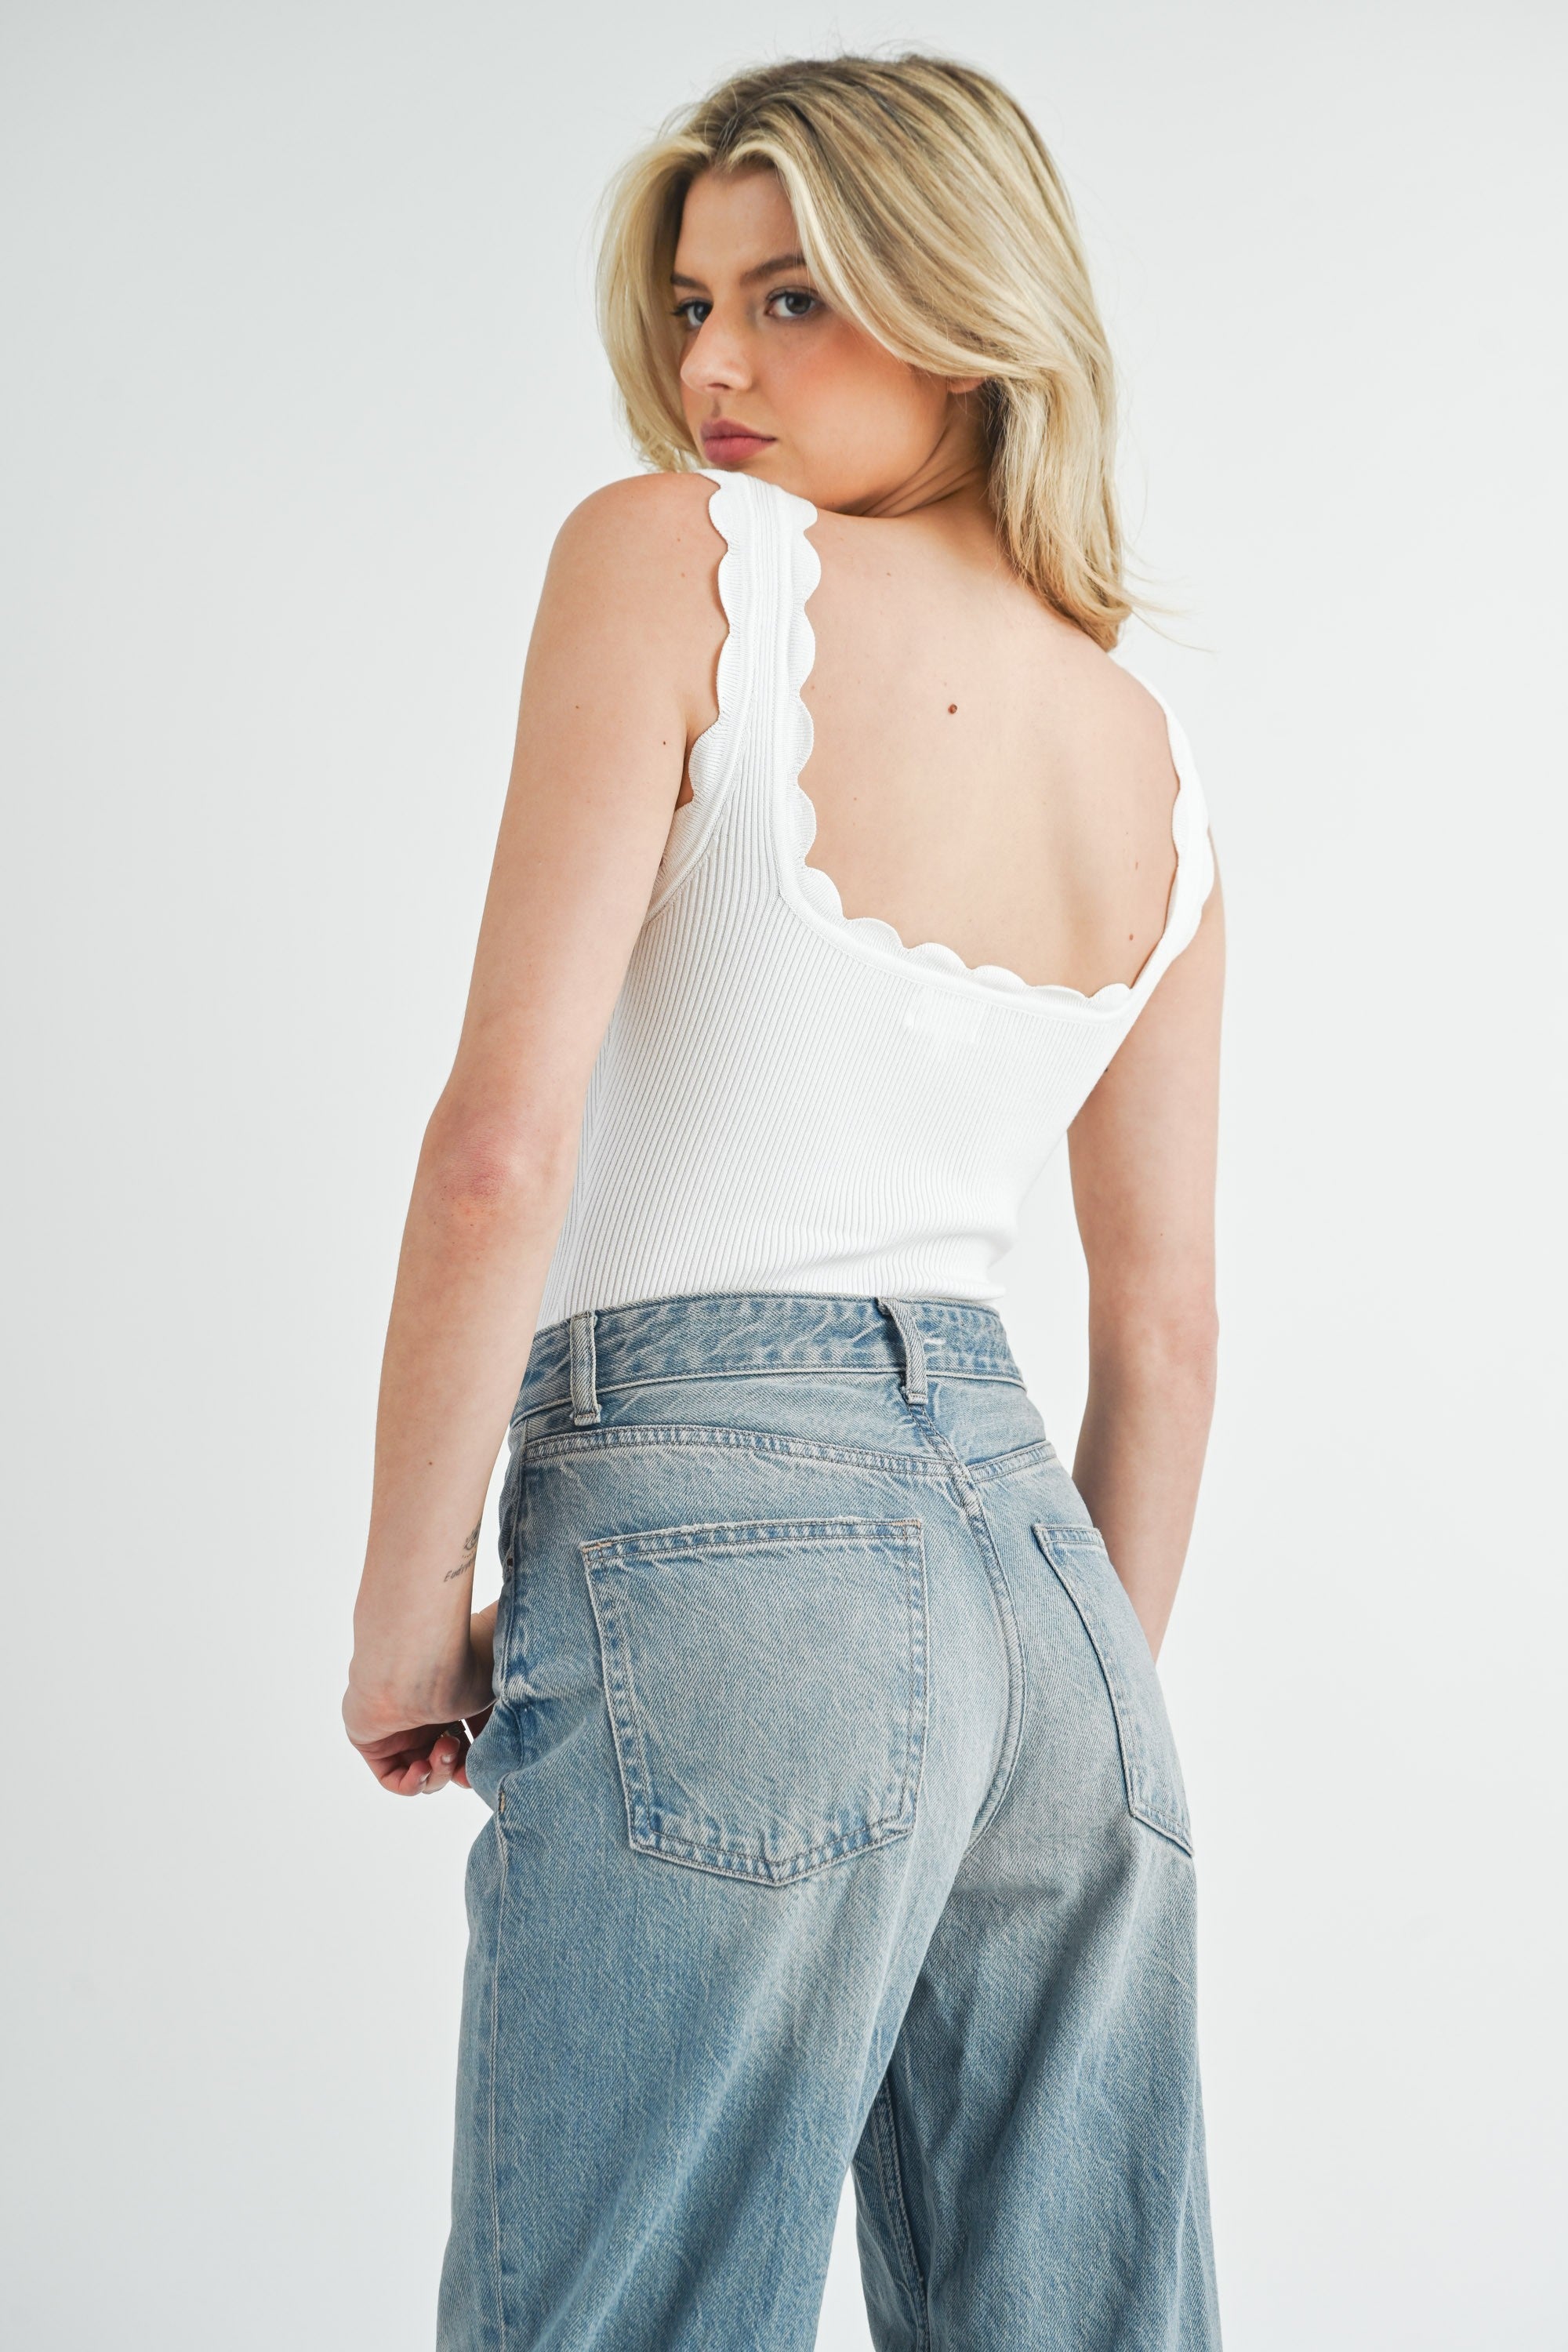 Mable | White Scallop Bodysuit | Sweetest Stitch Shop for Cute Tops